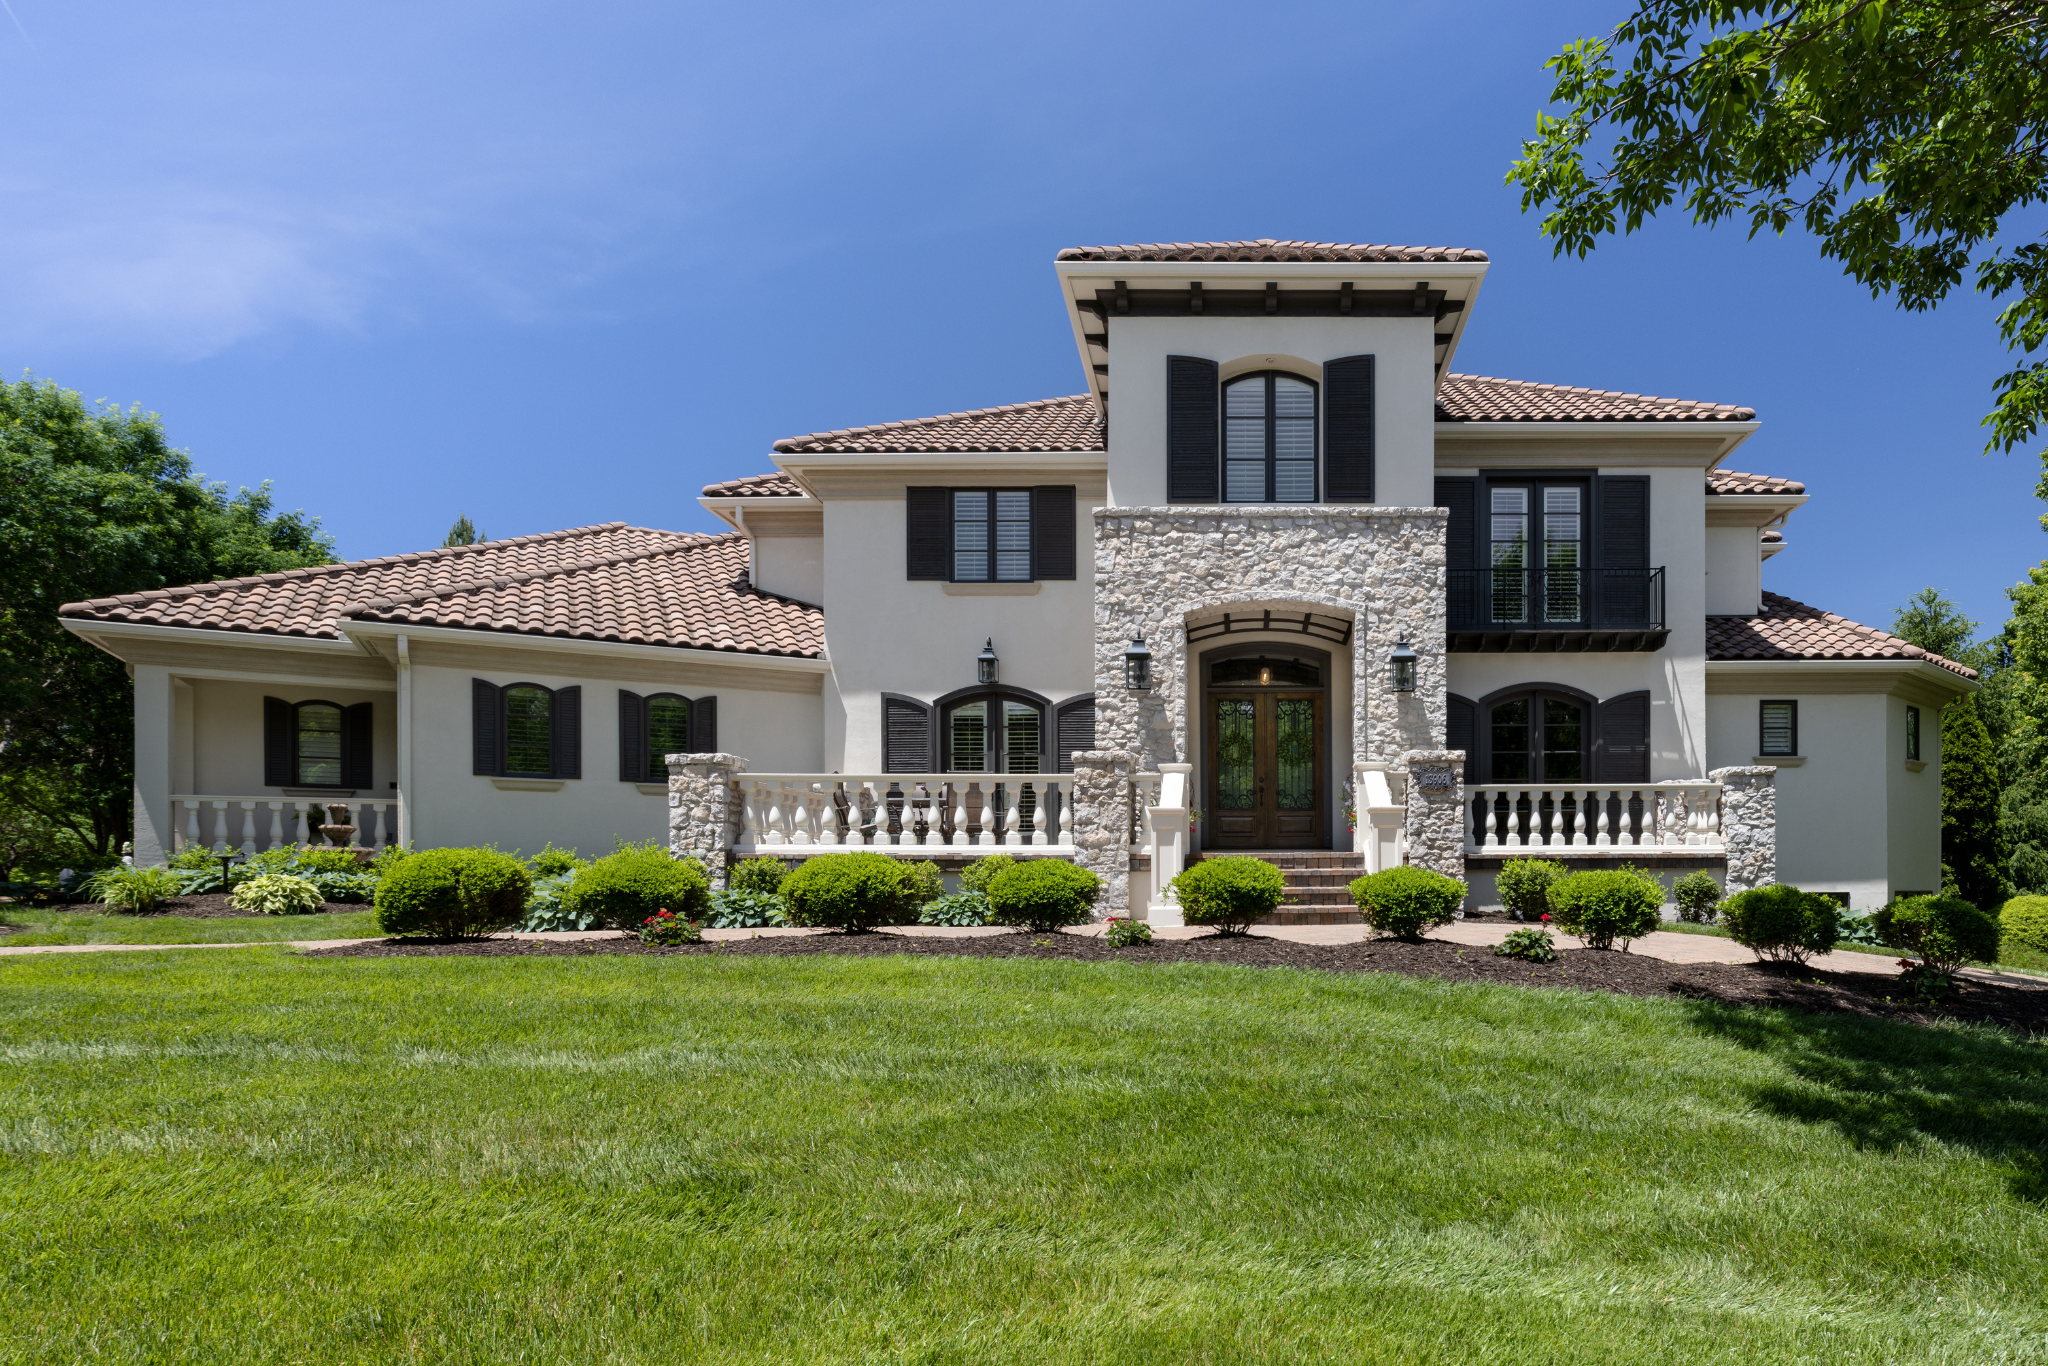 tuscan-style home sitting on a circle drive